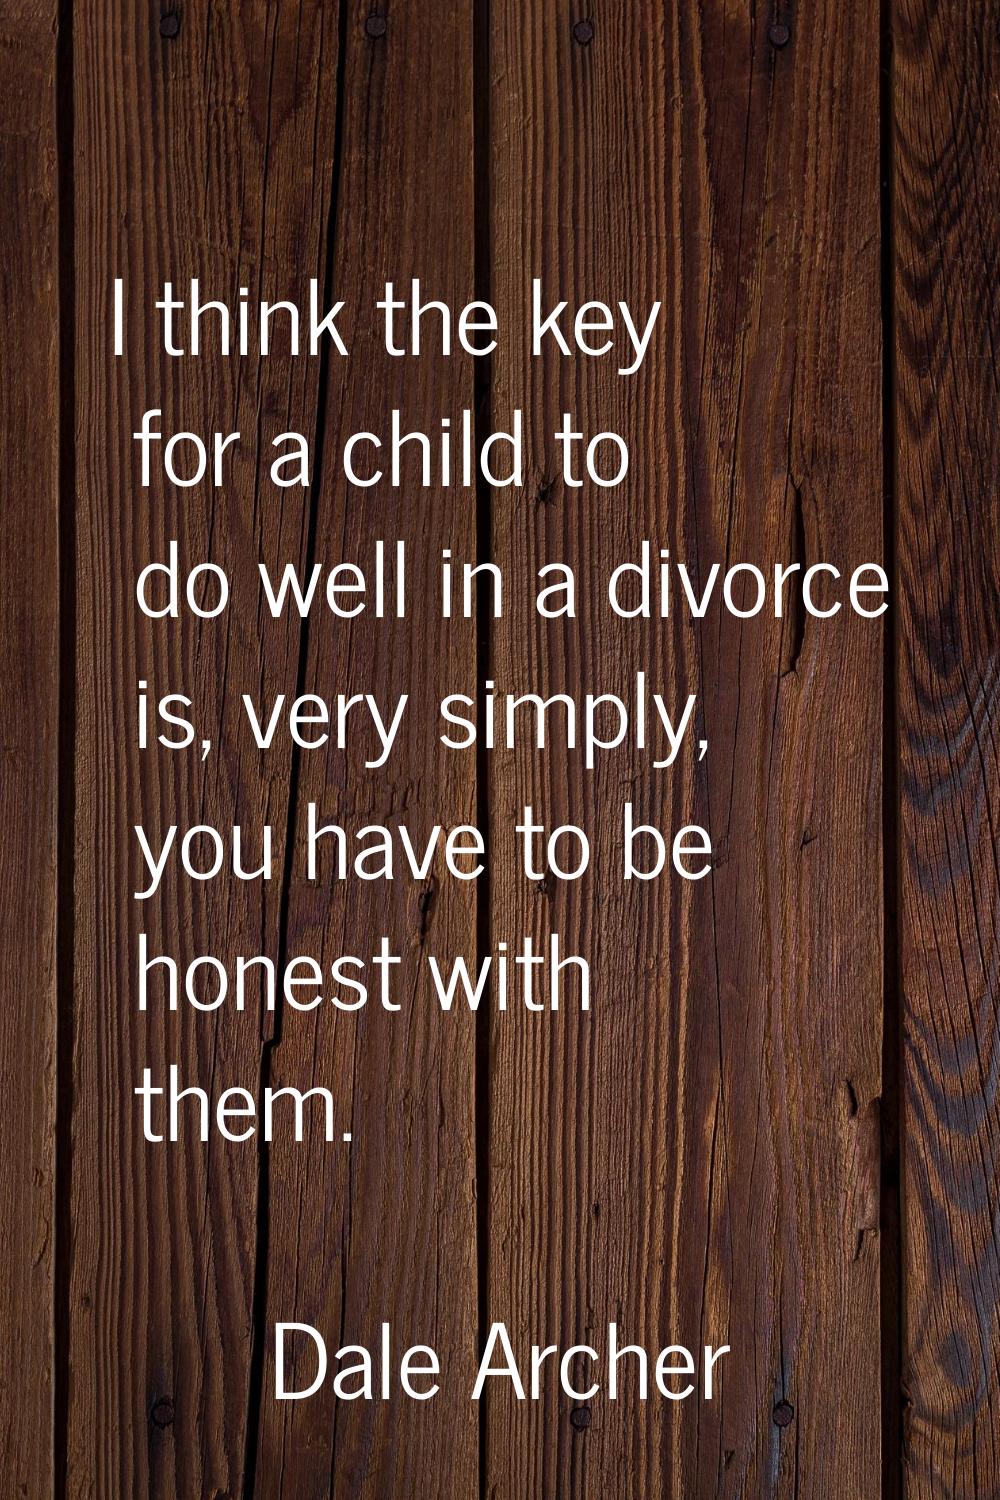 I think the key for a child to do well in a divorce is, very simply, you have to be honest with the